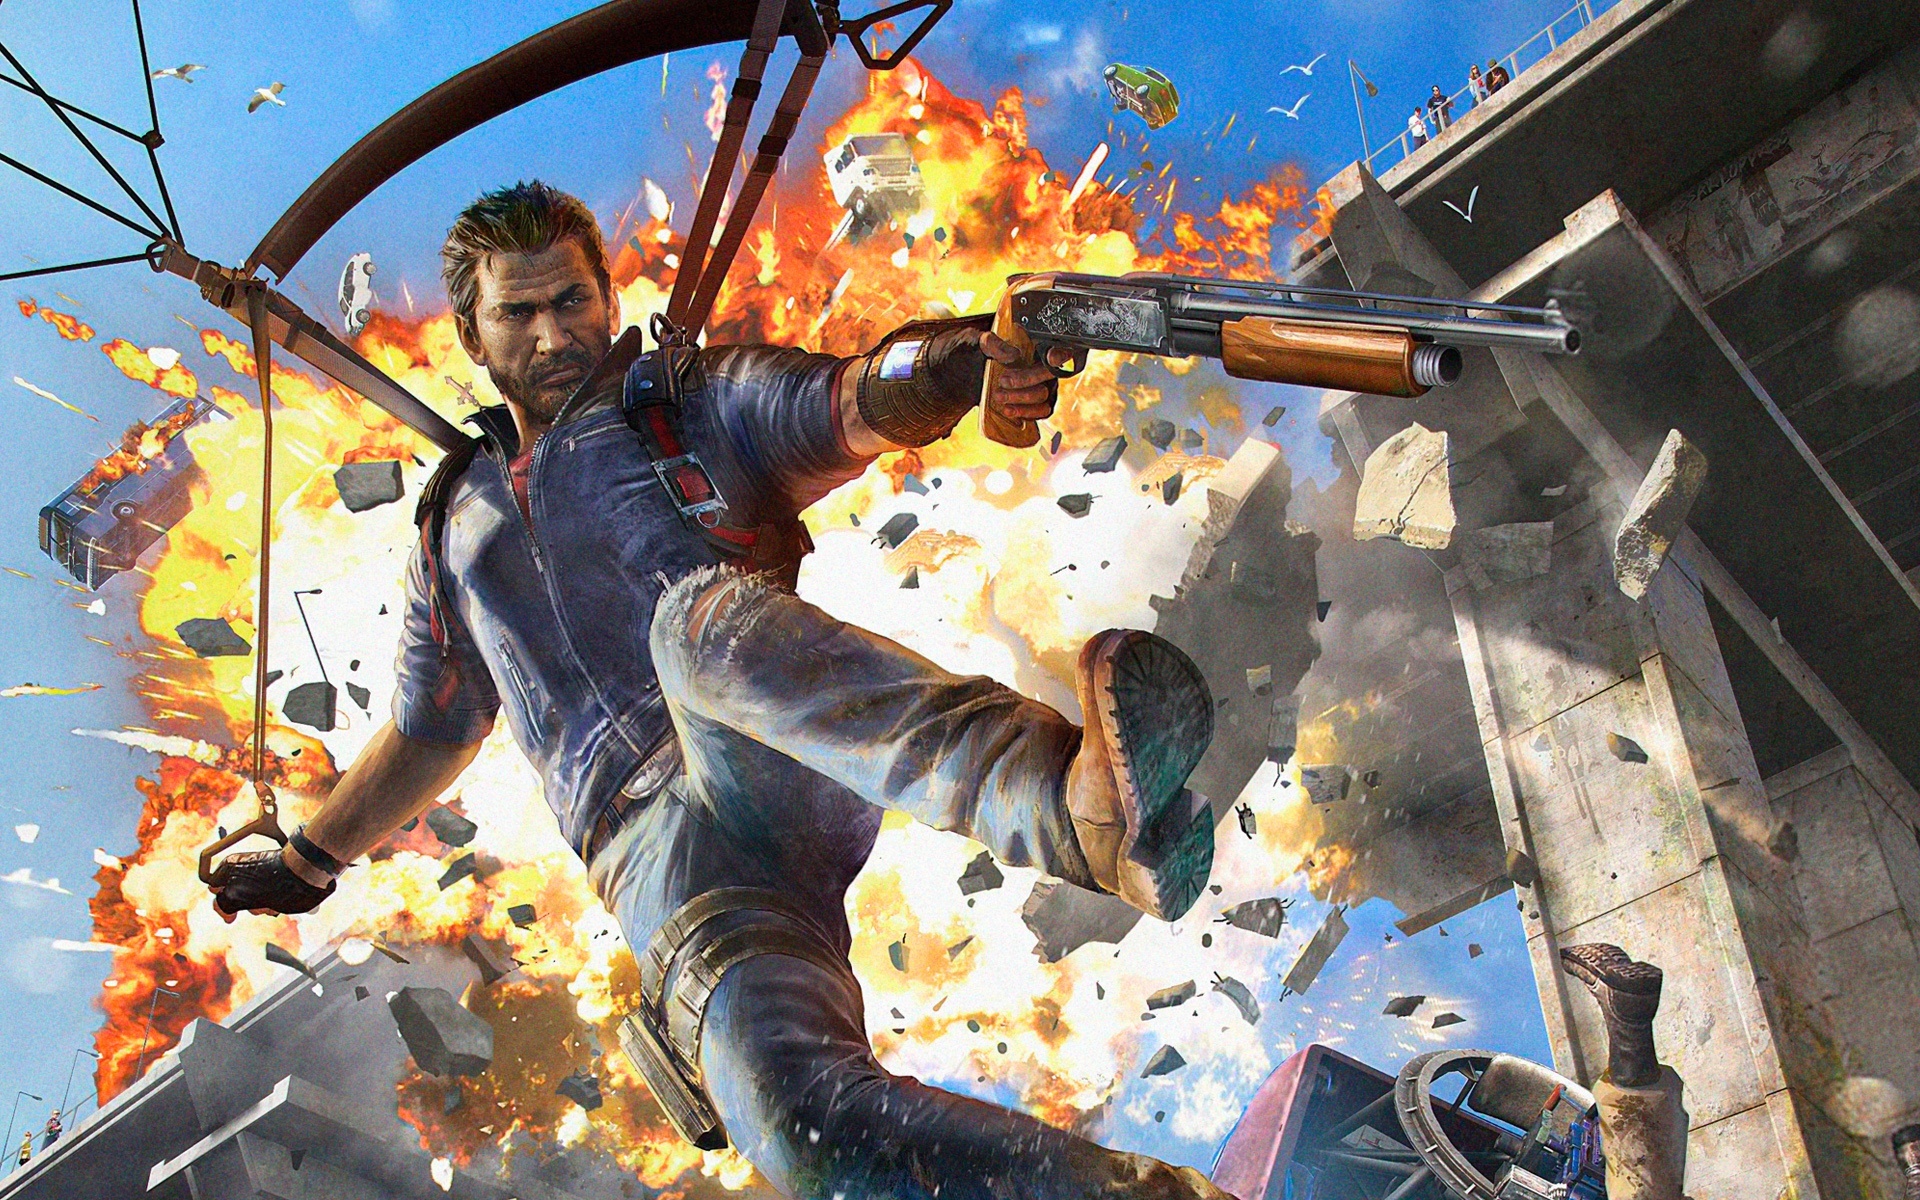 Just game перевод. Рико Родригес just cause 3. Рико Родригес just cause 1. Рико Родригес just cause 2. Игра just cause 3.